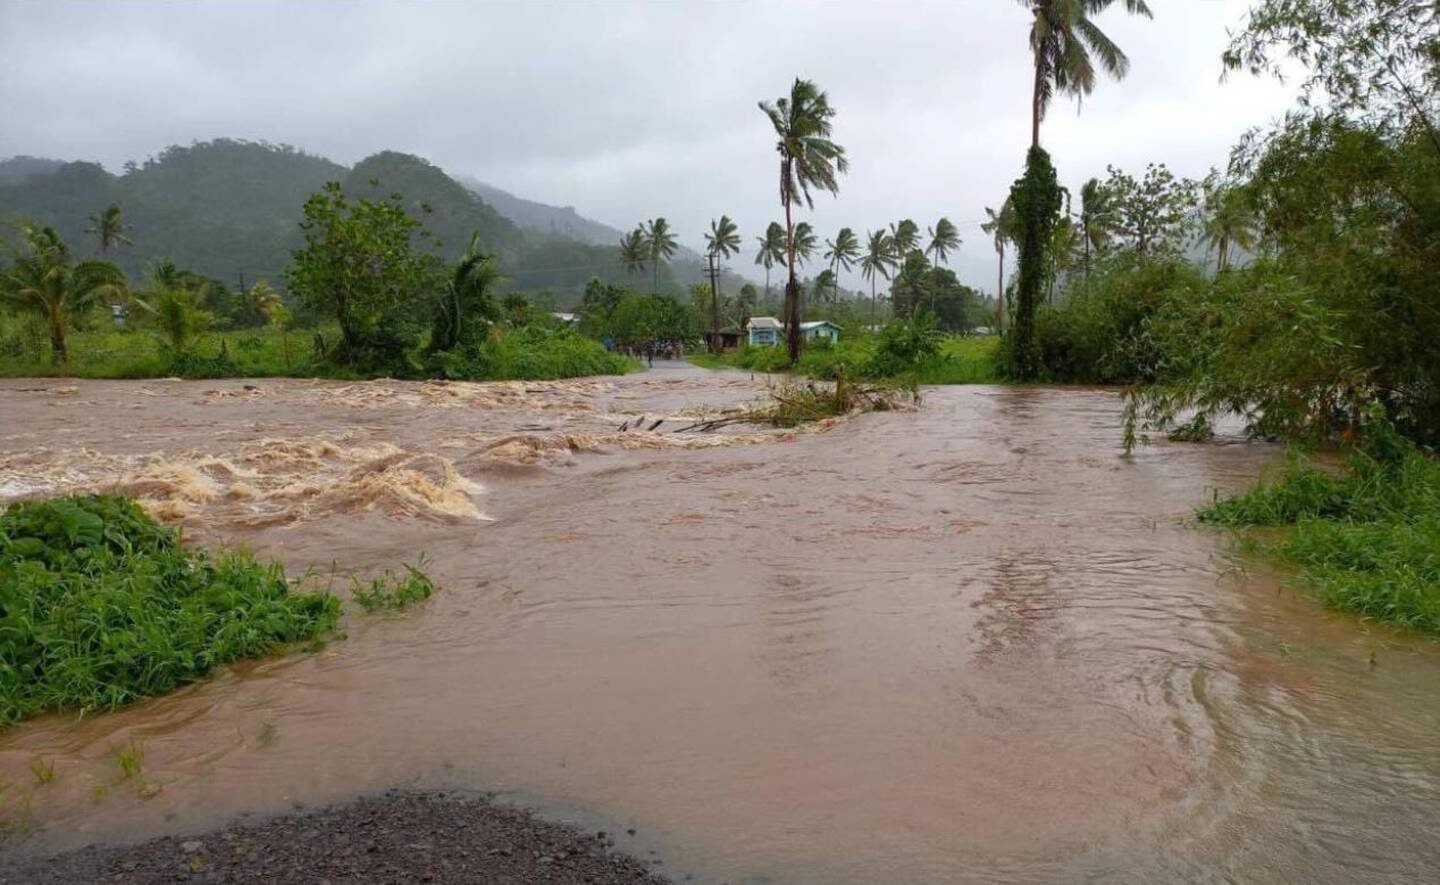 People in Fiji are being warned of flash floods due to a category 1 tropical cyclone